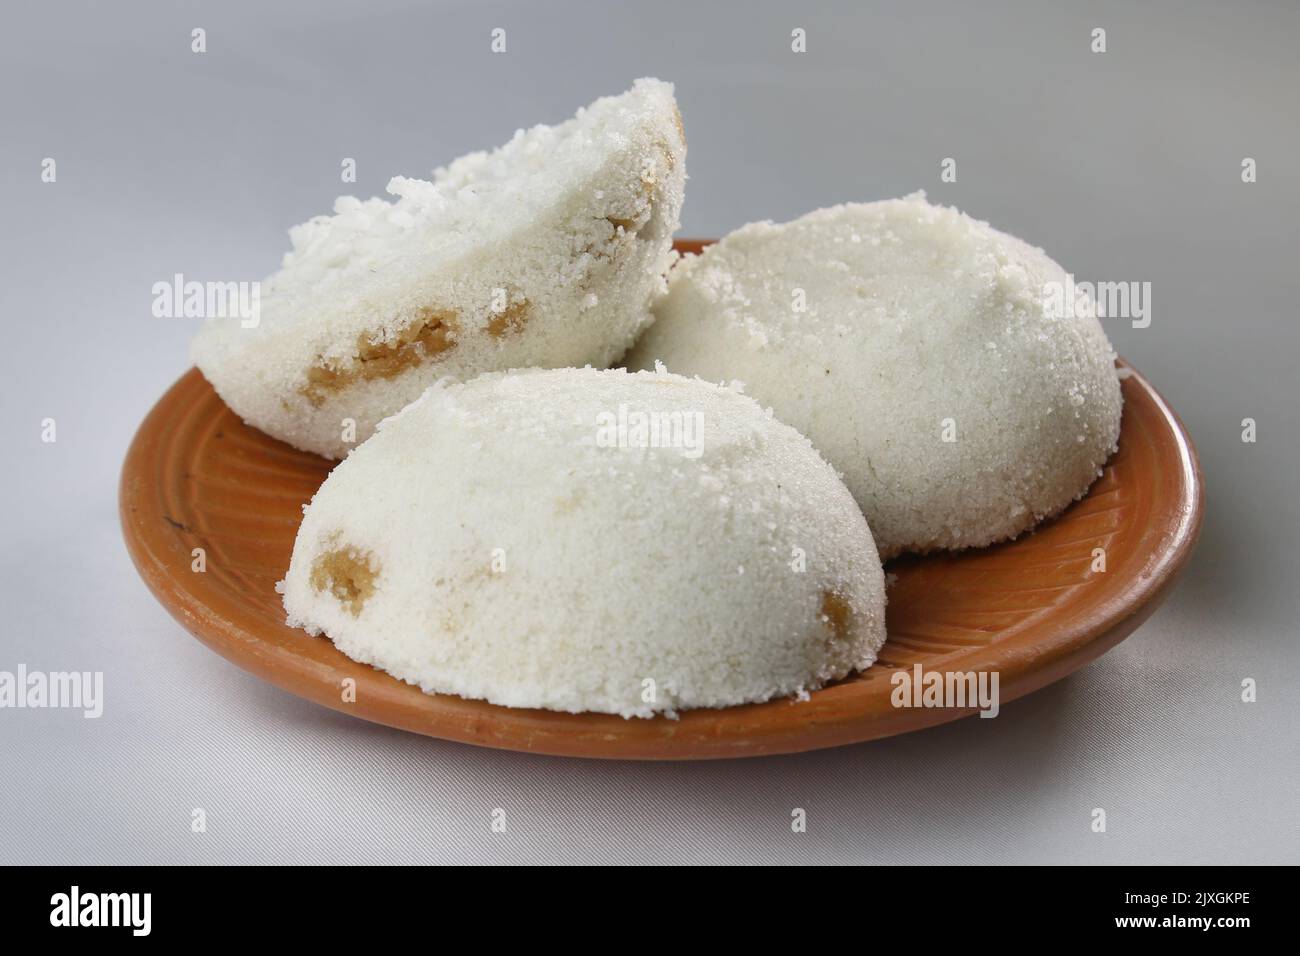 Steamed Rice Cake or Bhapa Pitha is a traditional dish of Bangladesh. Winter Vapa Pitha snacks on clay plate. Stock Photo